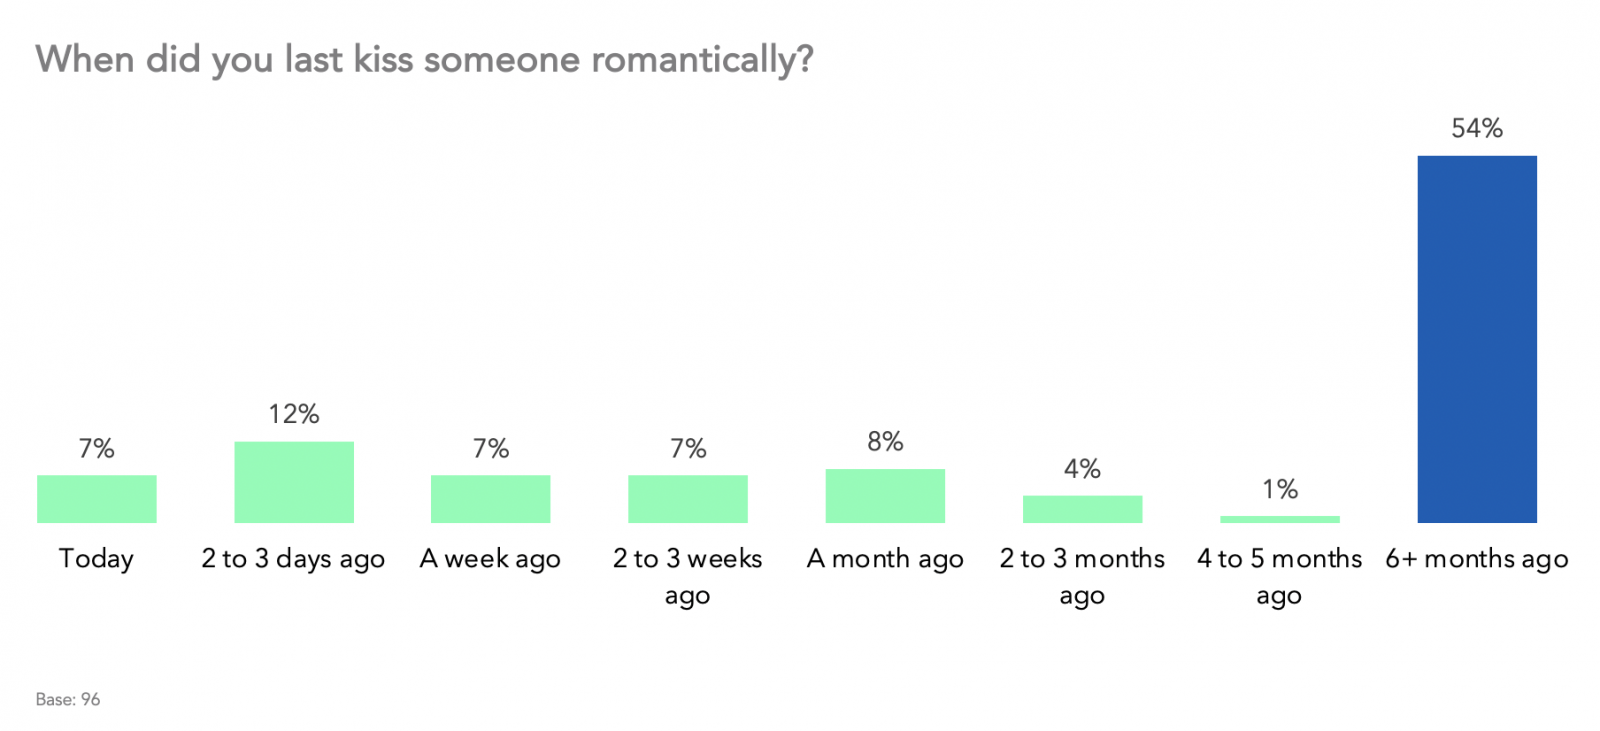 When did you last kiss someone romantically?